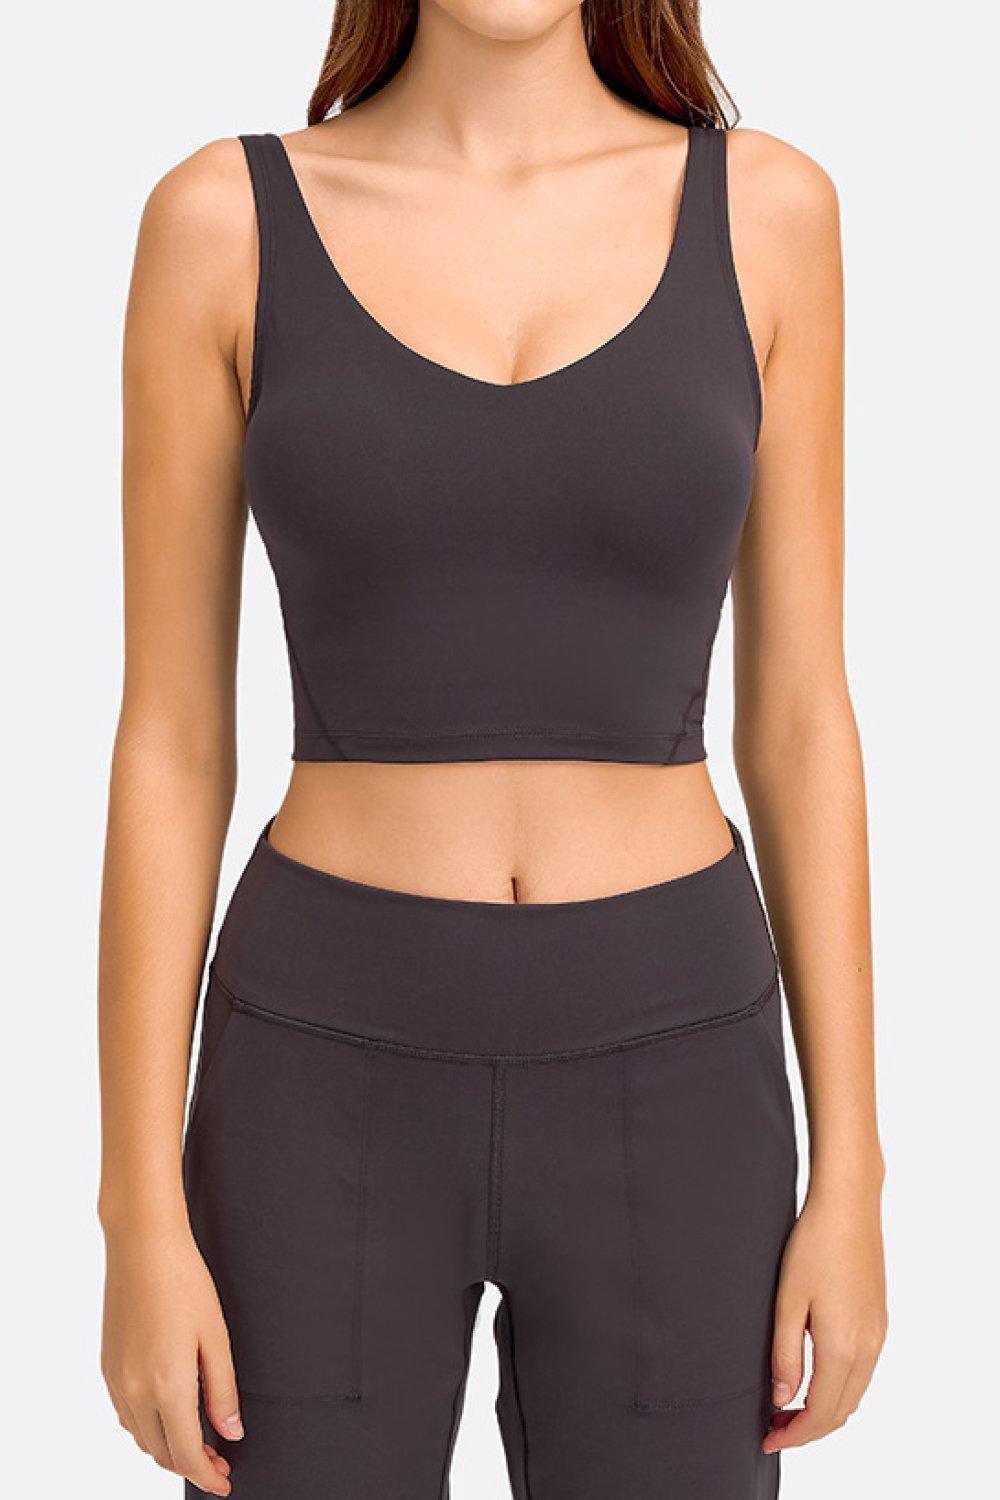 Deep V-Neck Crop Sports and Yoga Bra - Personal Hour for Yoga and Meditations 